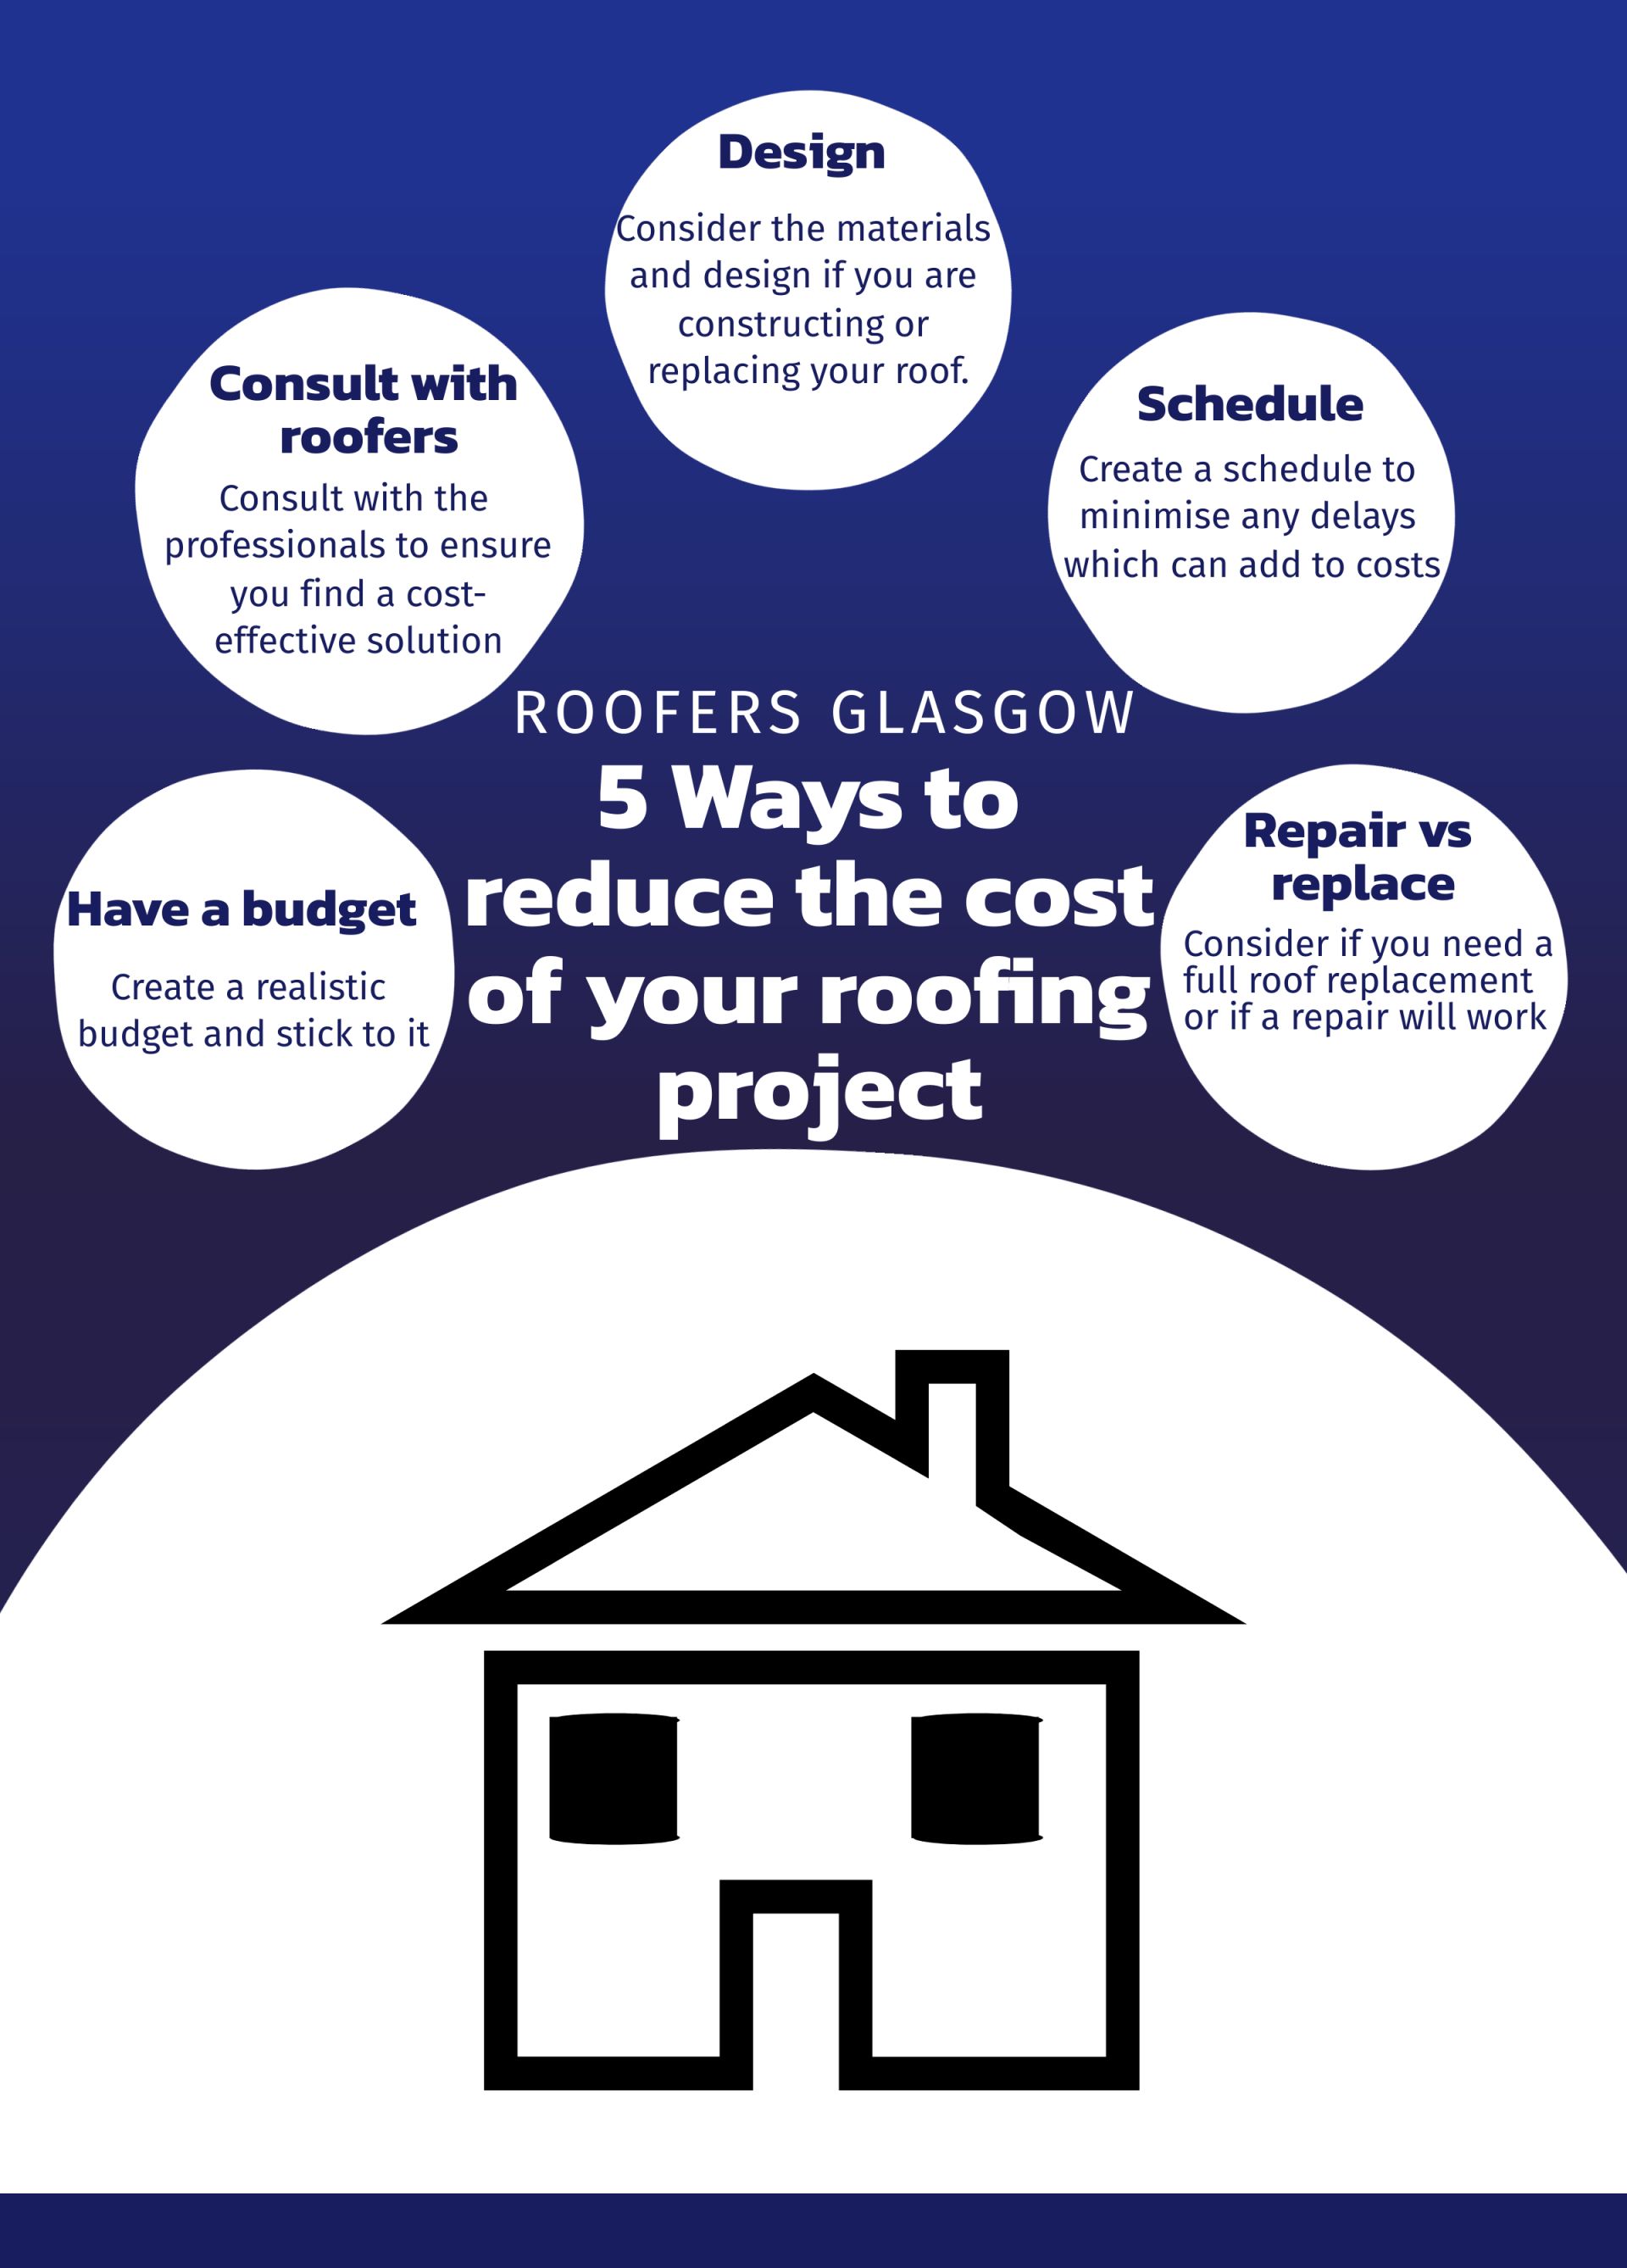 Roofers Glasgow - 5 ways to reduce the cost of your roofing Glasgow project